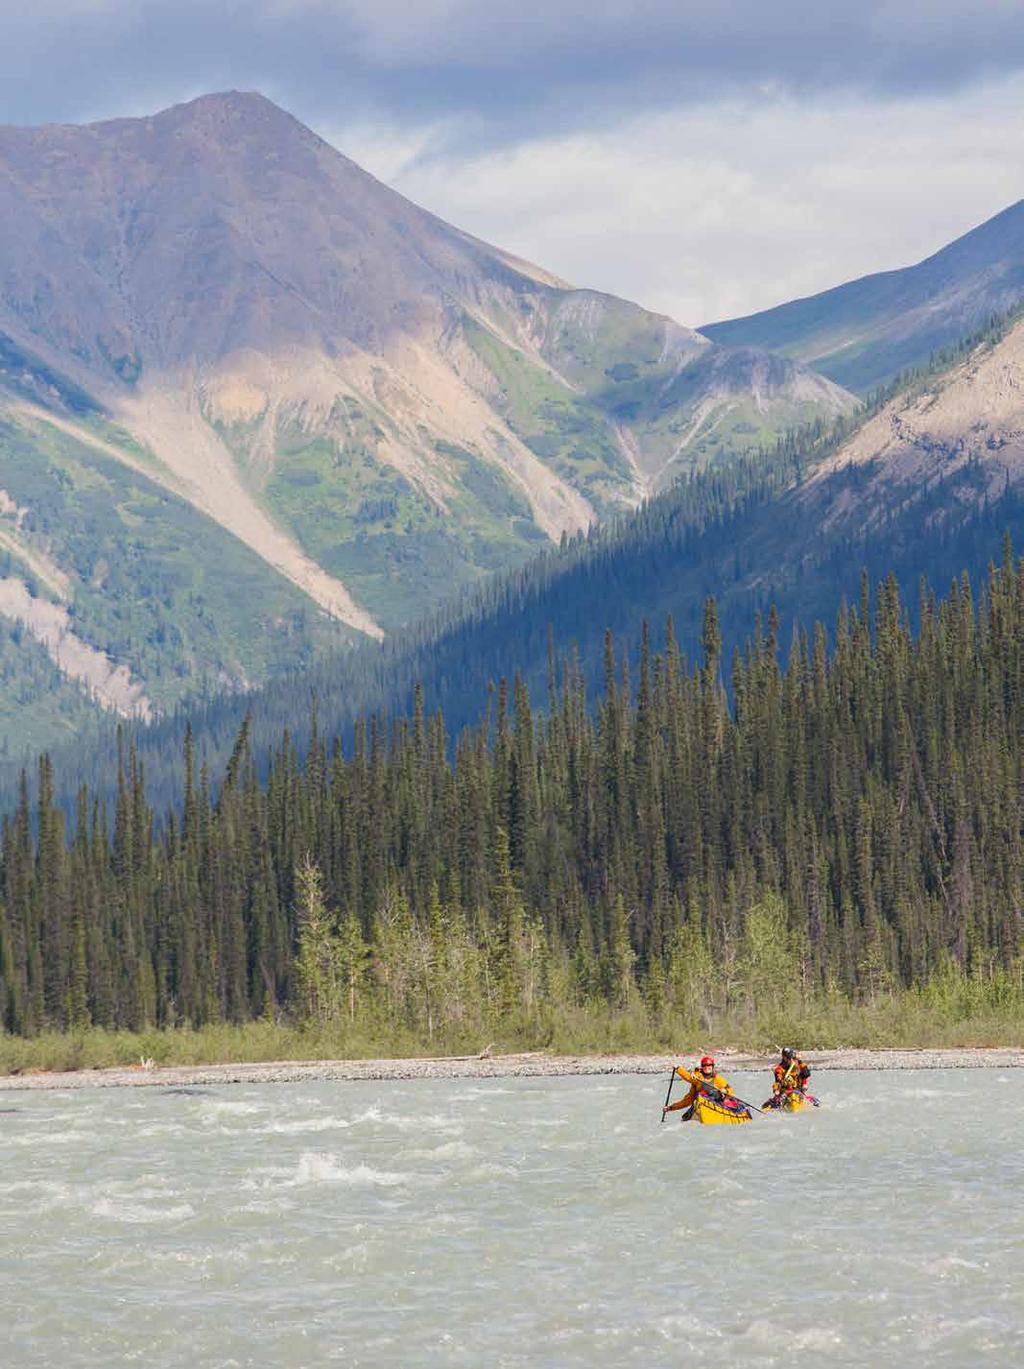 Get to Know Nááts ihch oh Welcome to Our Home Mount Nááts ihch oh (Mount Wilson) Nahanni and Nááts ihch oh Red Chairs Paddling the Broken Skull River Getting To Know the Broken Skull Paddling the